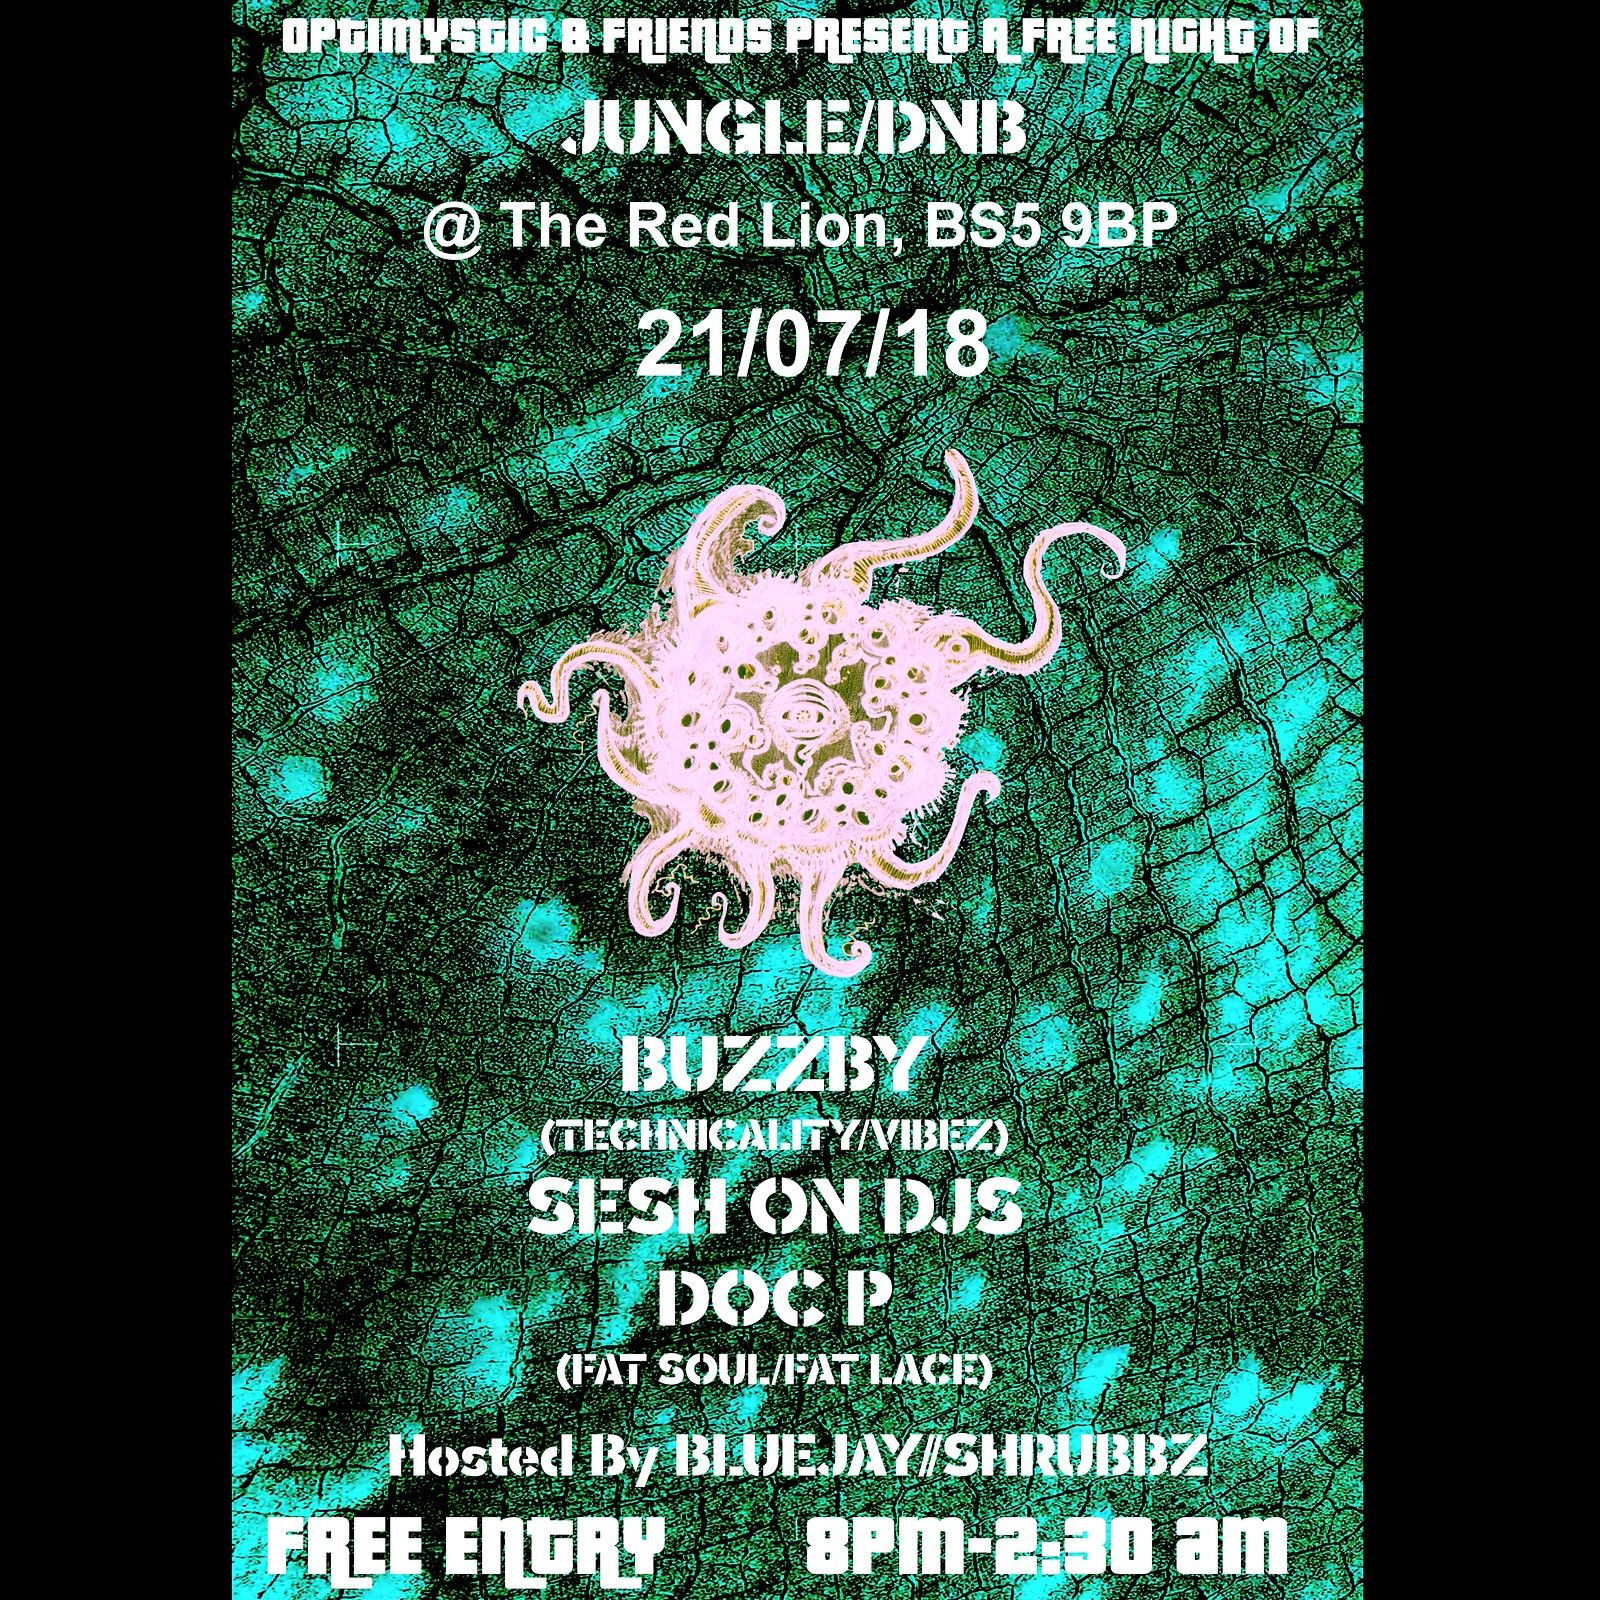 Optimystic & Friends Free Jungle/DnB Session 12 at the red lion